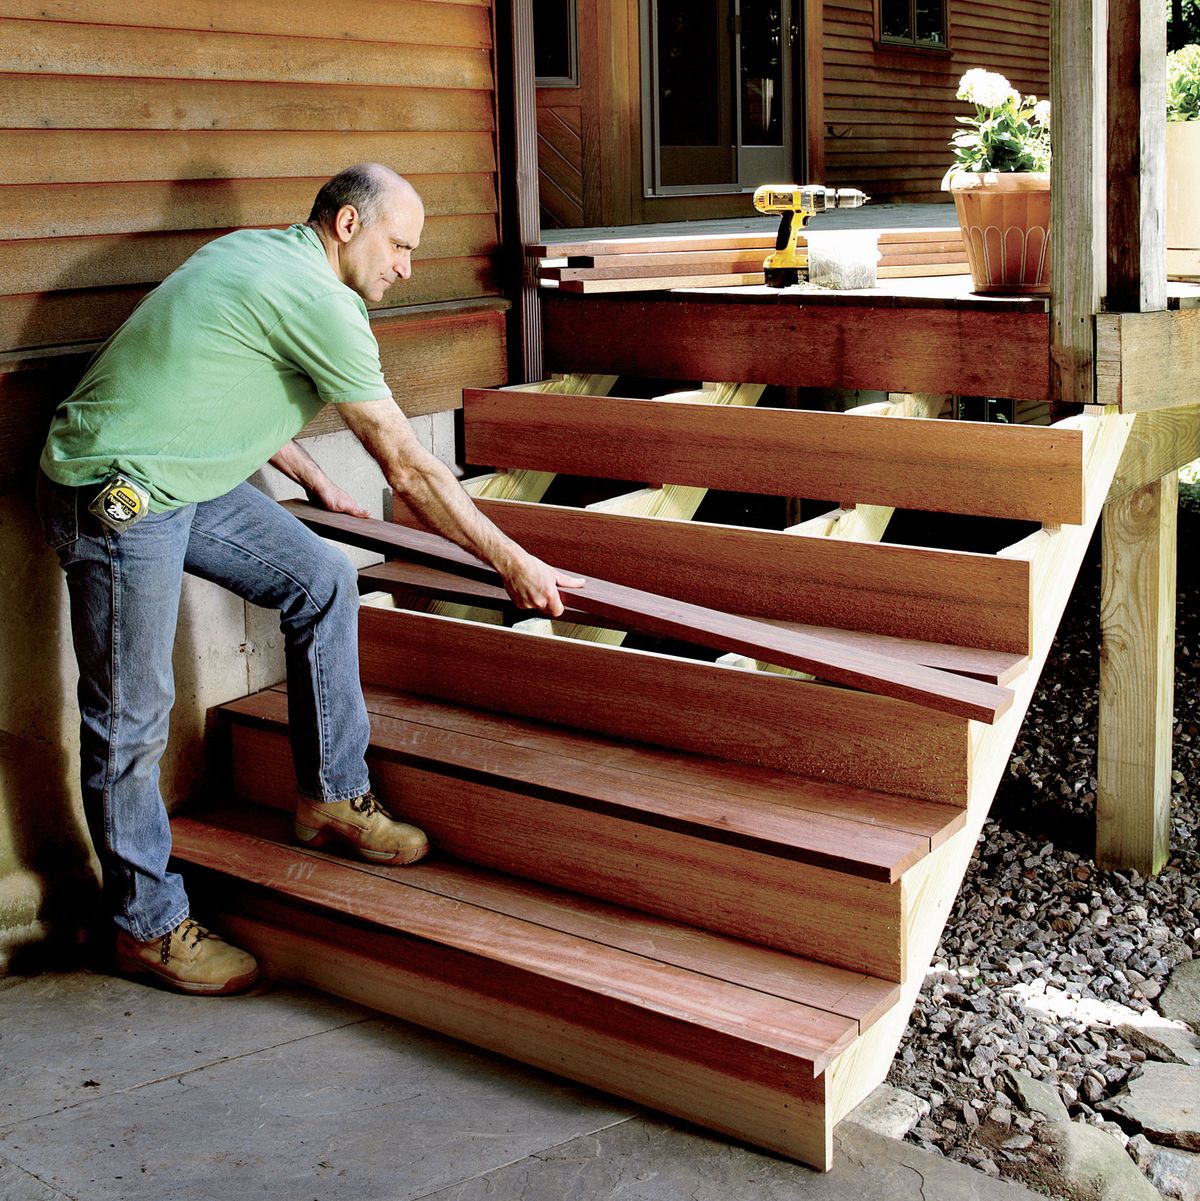 Wood, Hardwood, Lumber, Porch, Bench, Wood stain, Furniture, Stairs, Floor, Outdoor furniture, 